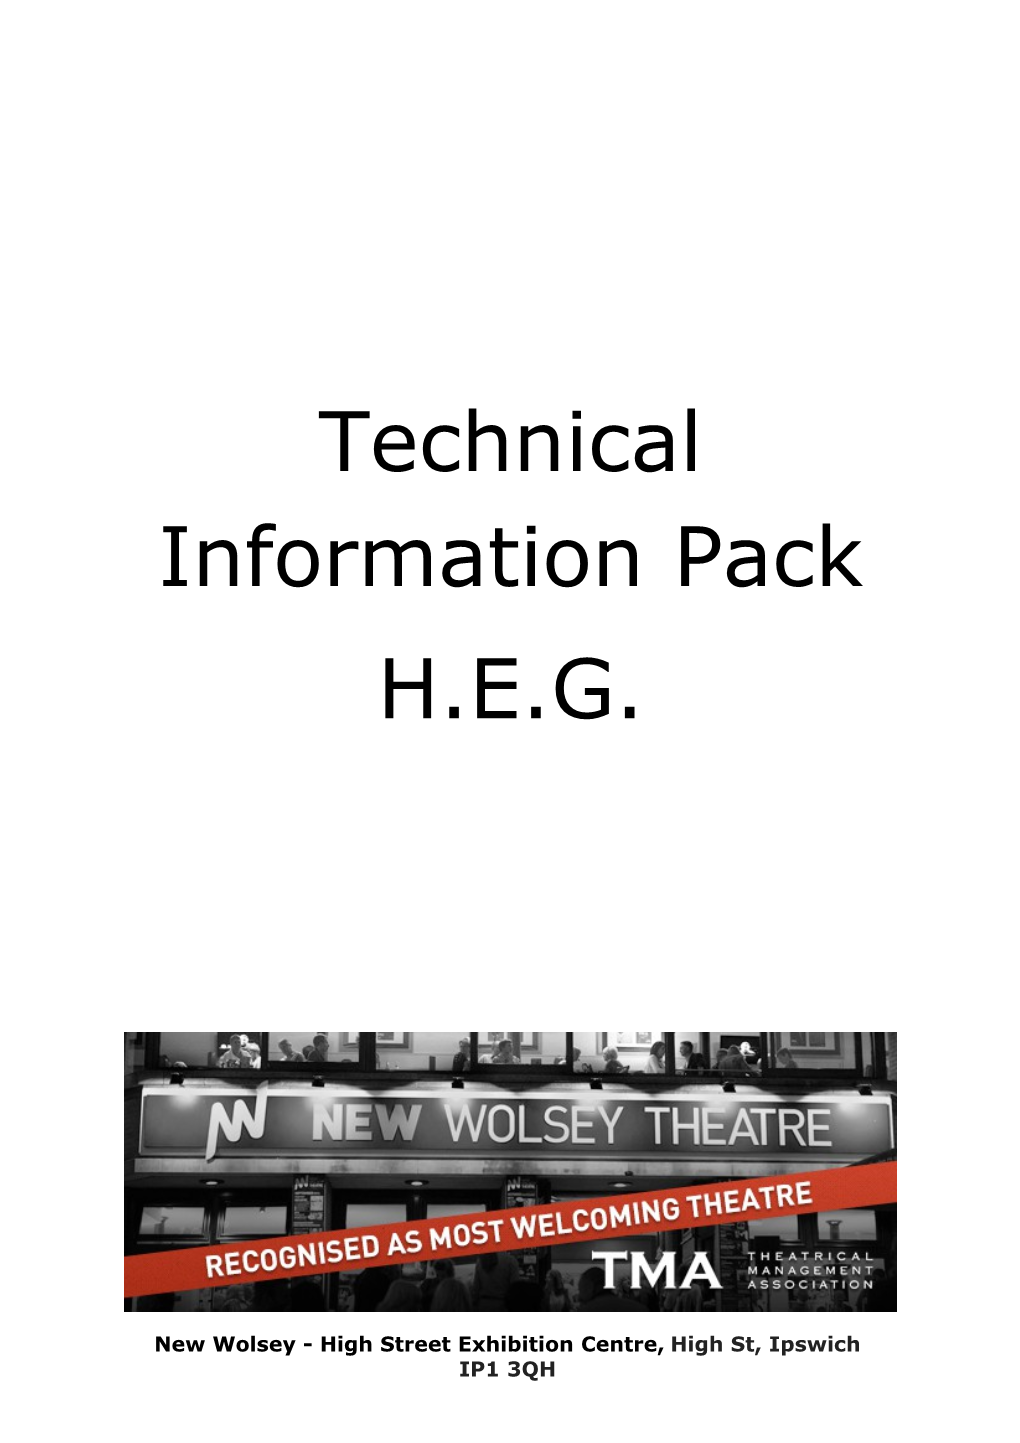 Hires Technical Information Pack